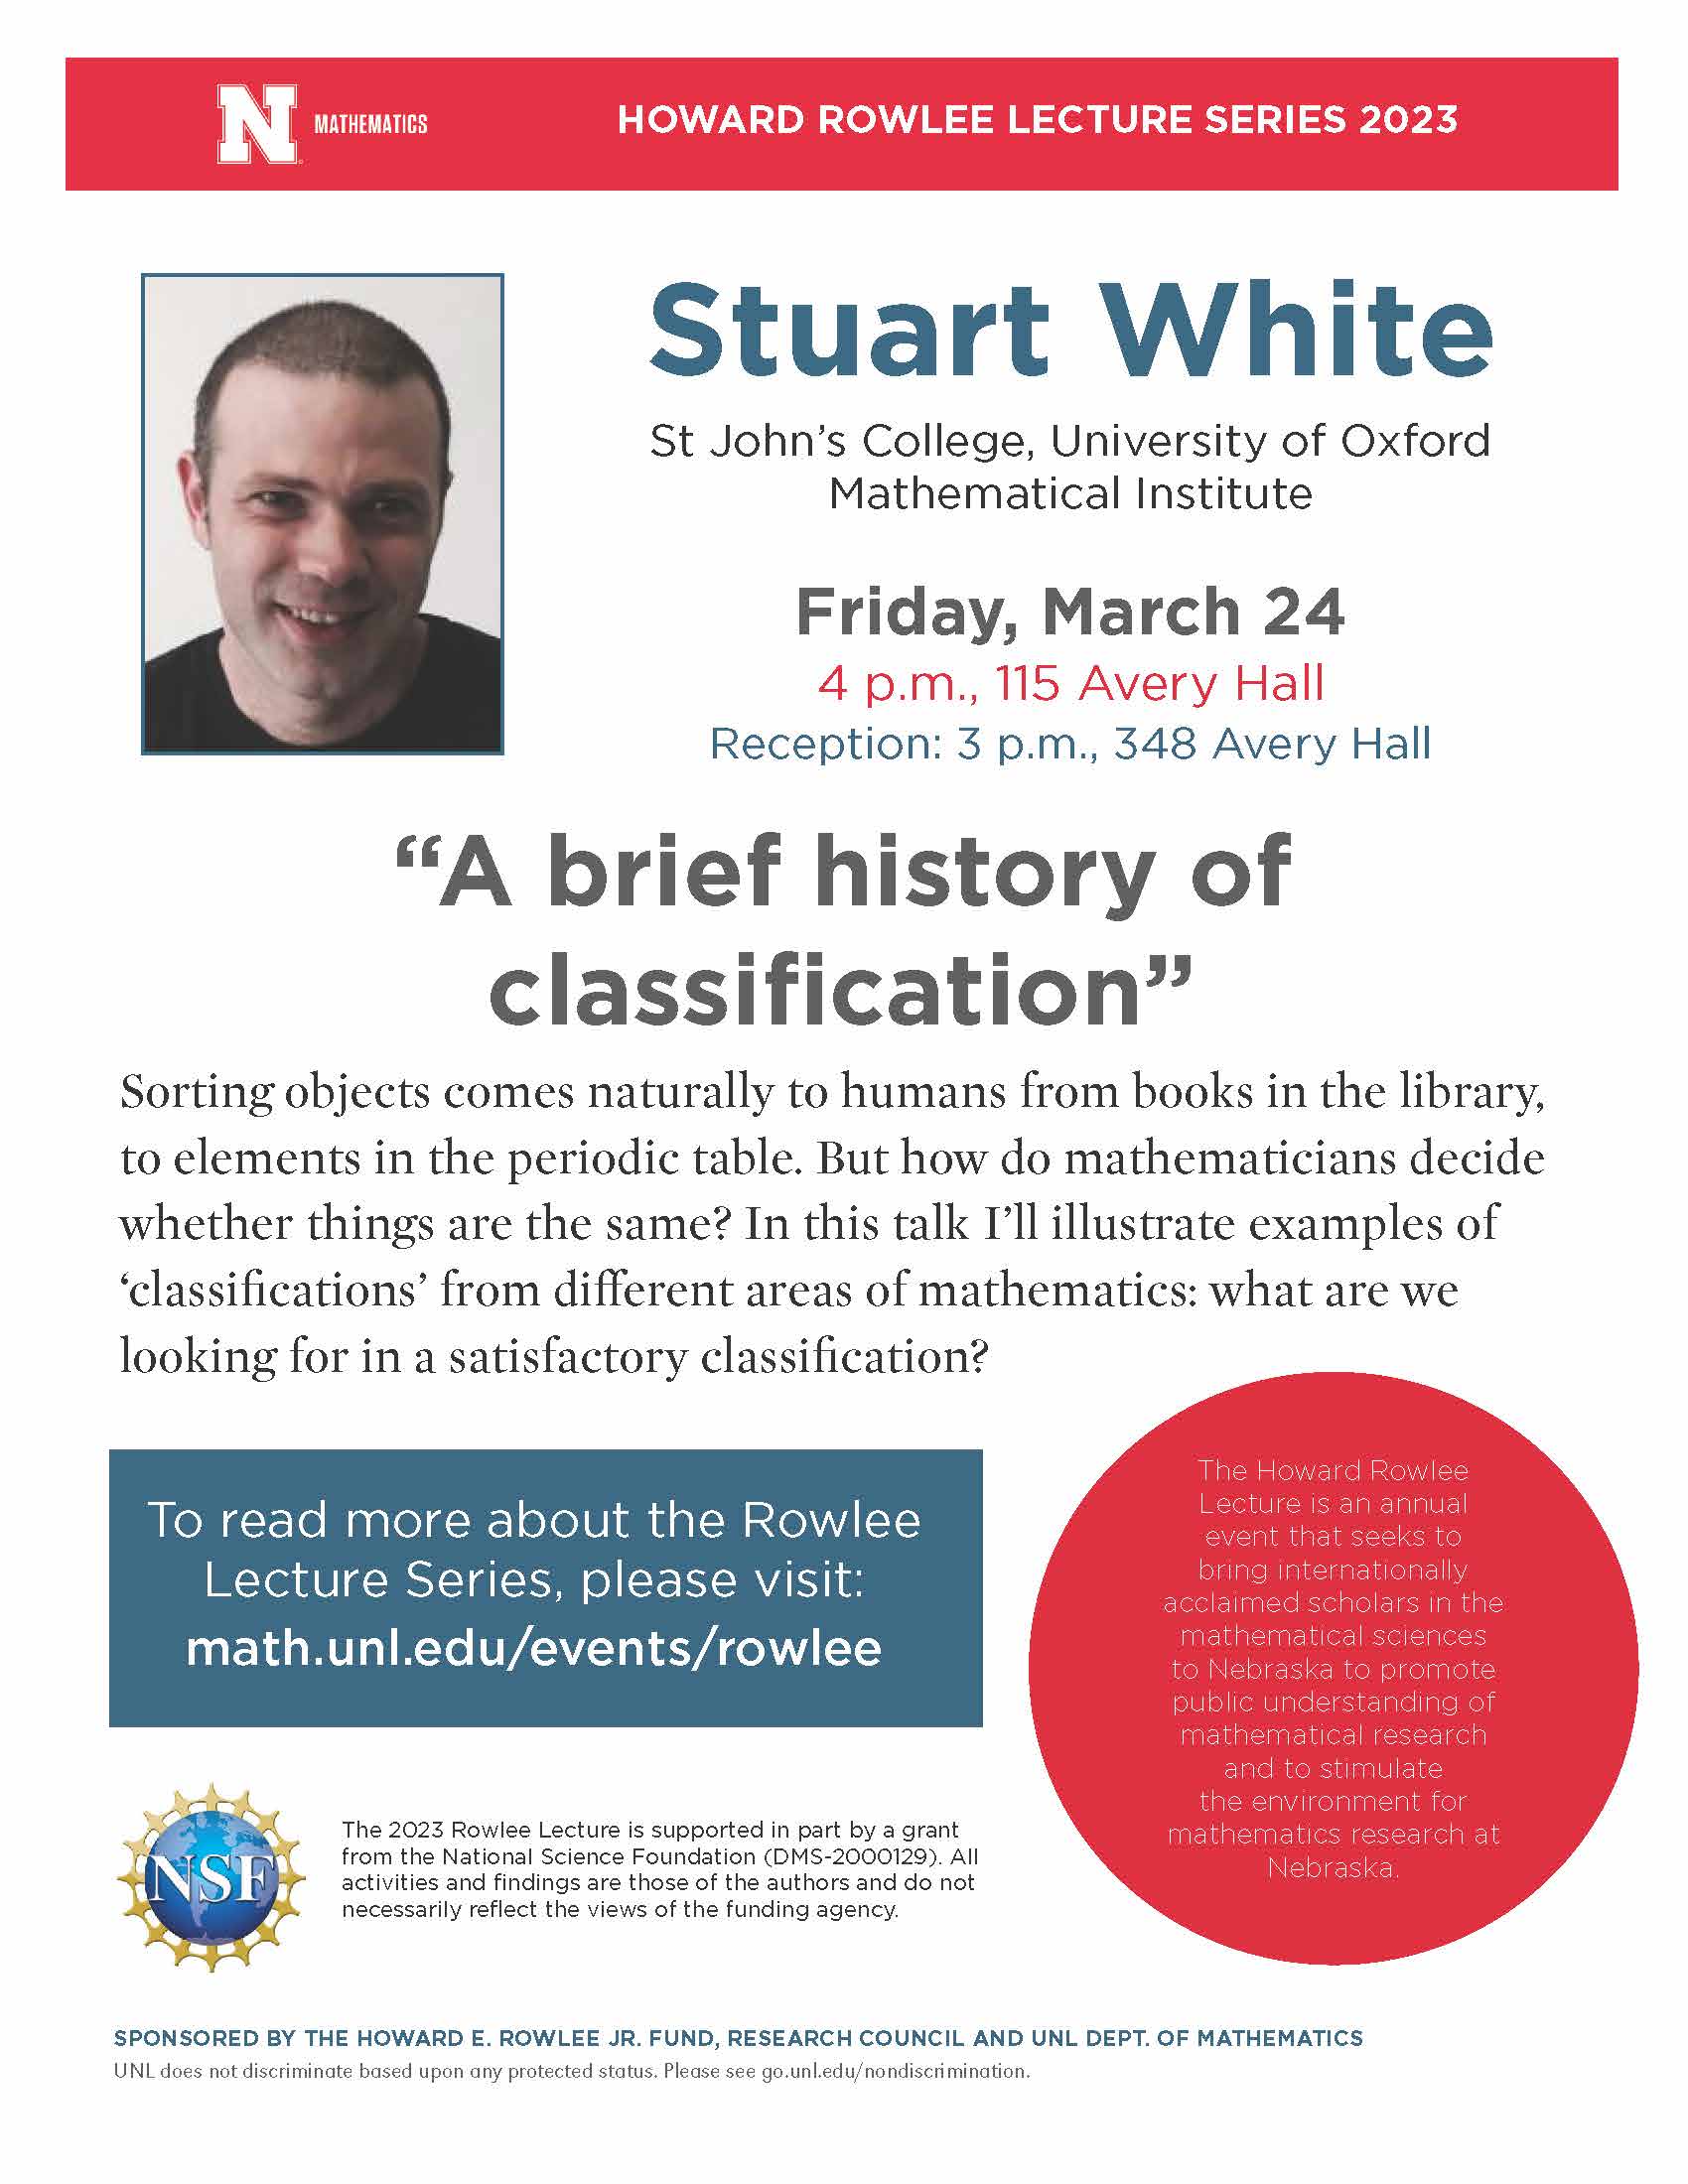 Rowlee Lecture: Stuart White - A Brief History of Classification